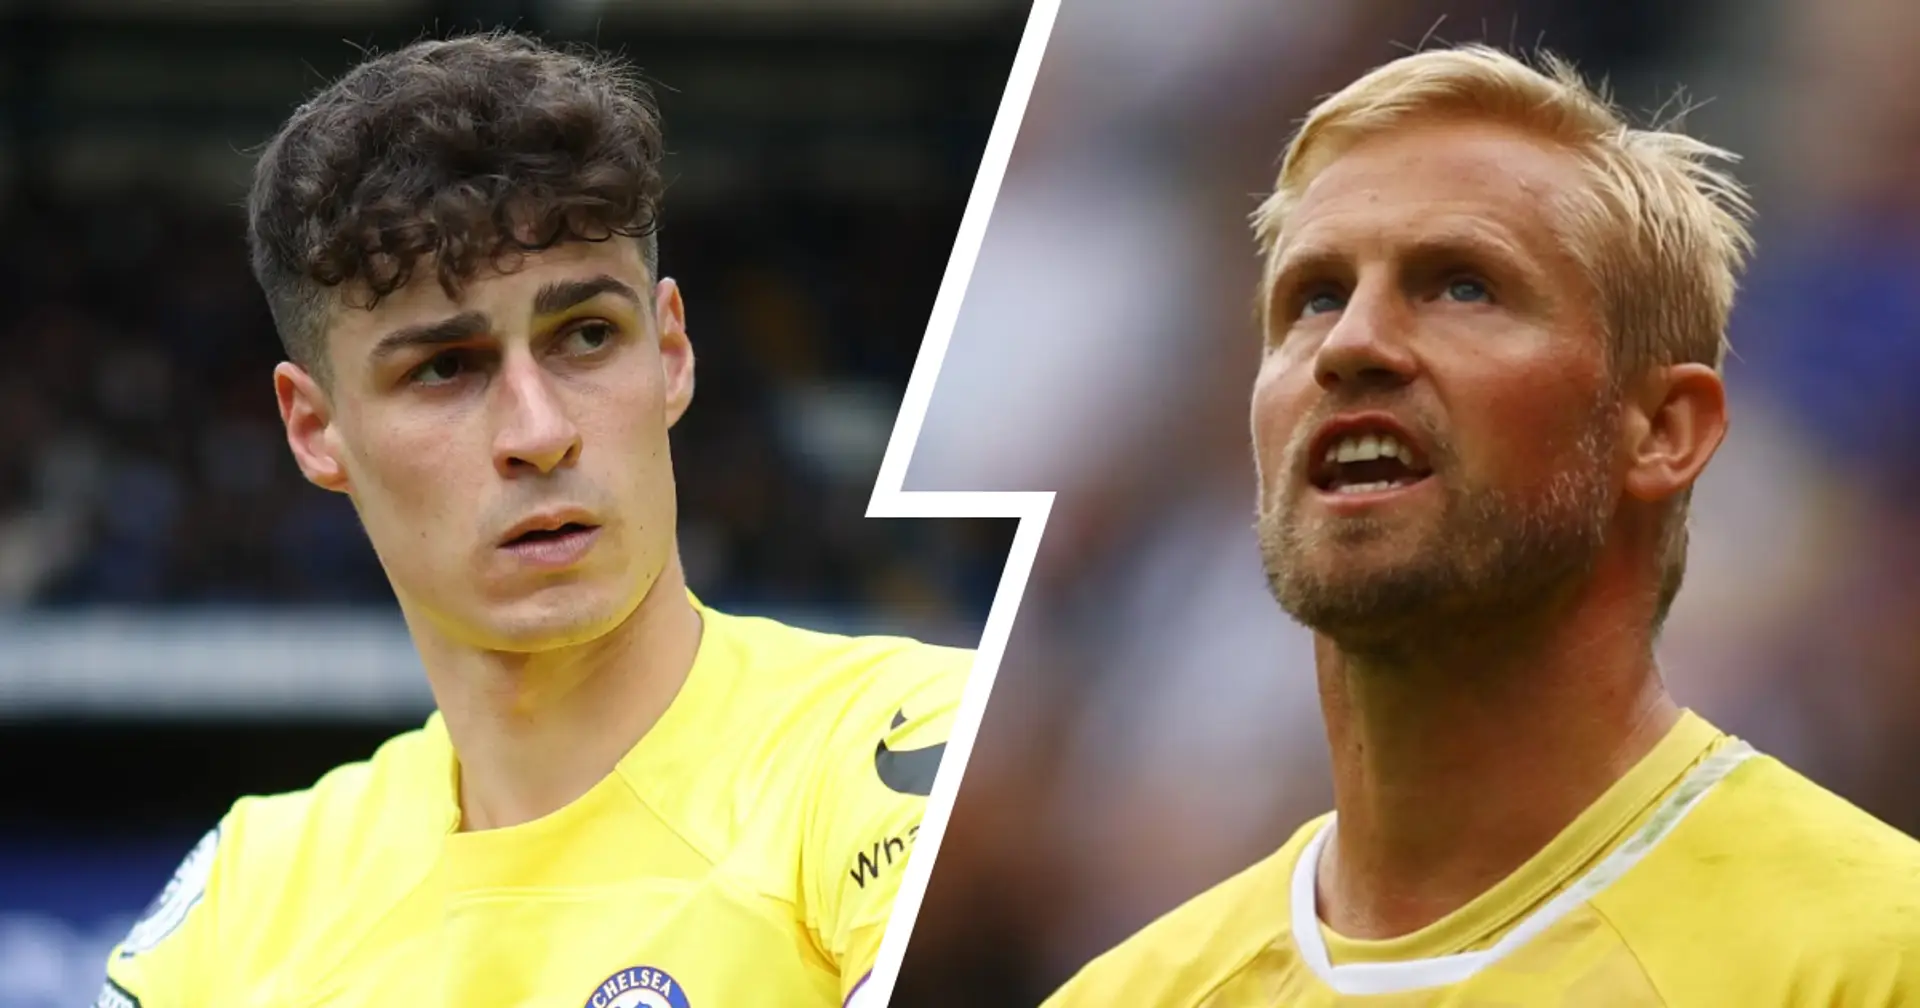 Chelsea consider 36-year-old former Premier League keeper as Kepa replacement (reliability: 5 stars)